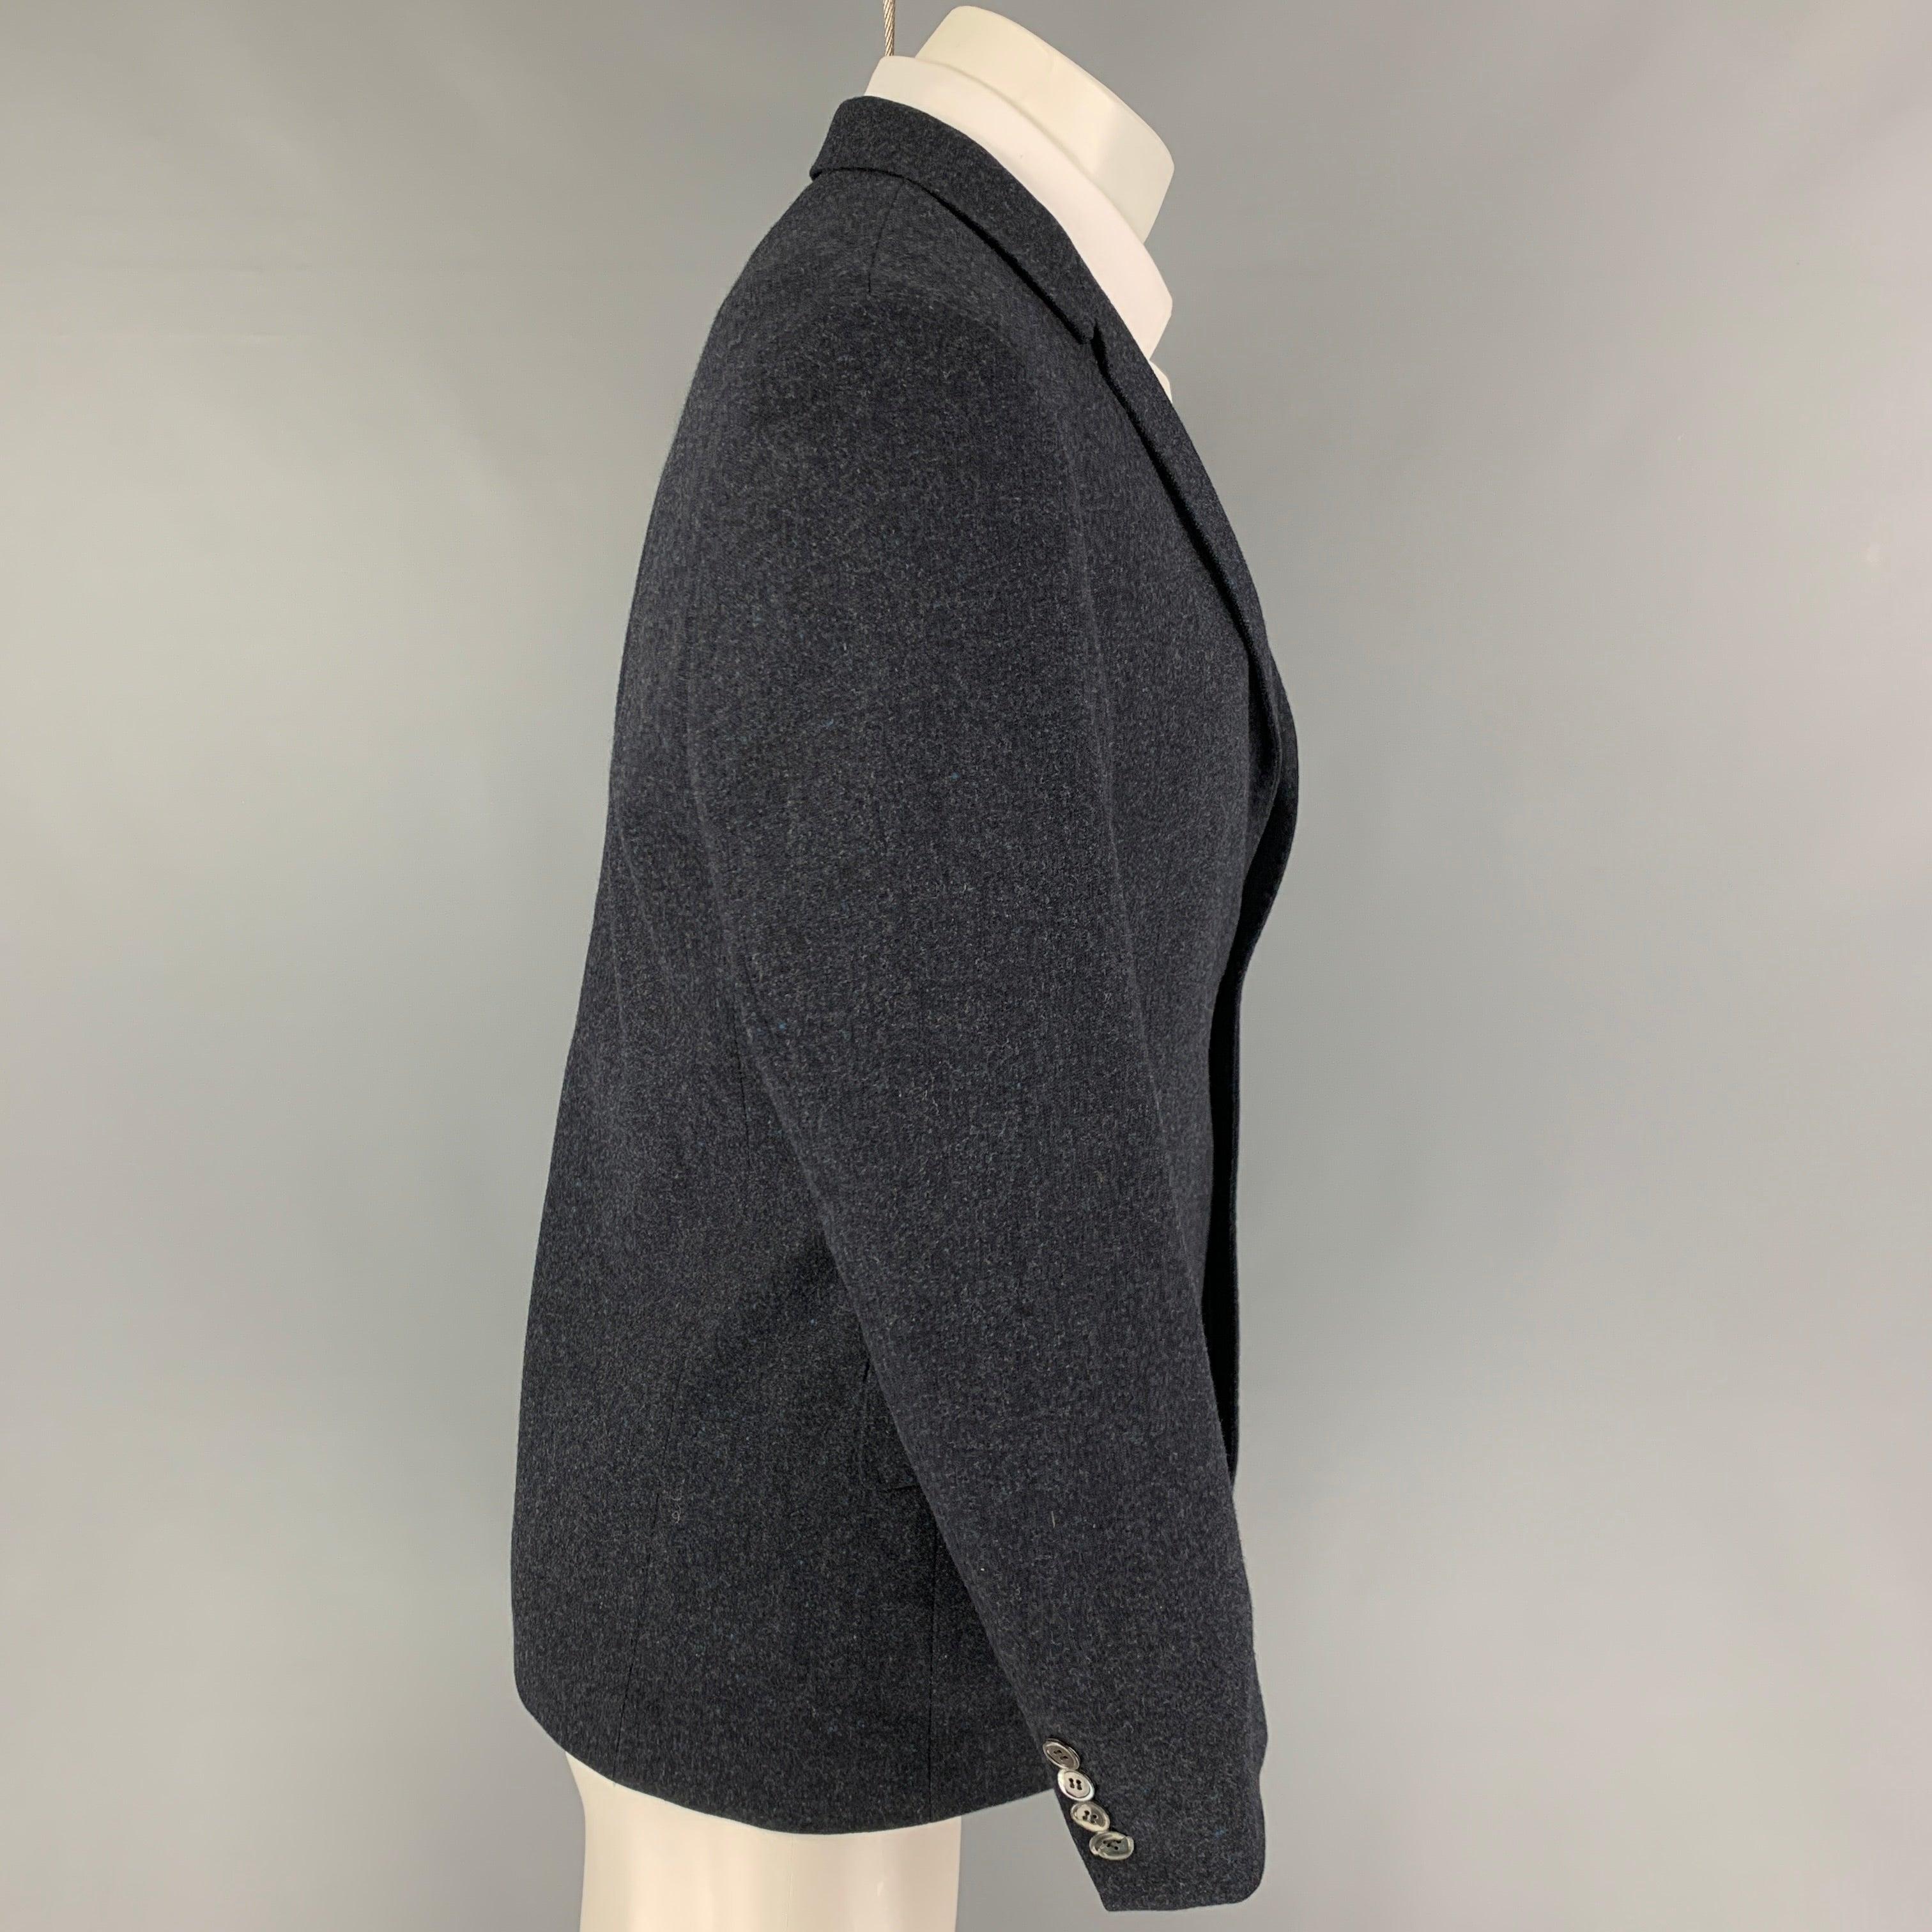 PAUL SMITH 'The Abbey' sport coat comes in a navy heather wool / cashmere with a full liner featuring a notch lapel, flap pockets, and a double button closure. Made in Italy.
Very Good
Pre-Owned Condition. 

Marked:   40/50 

Measurements: 
